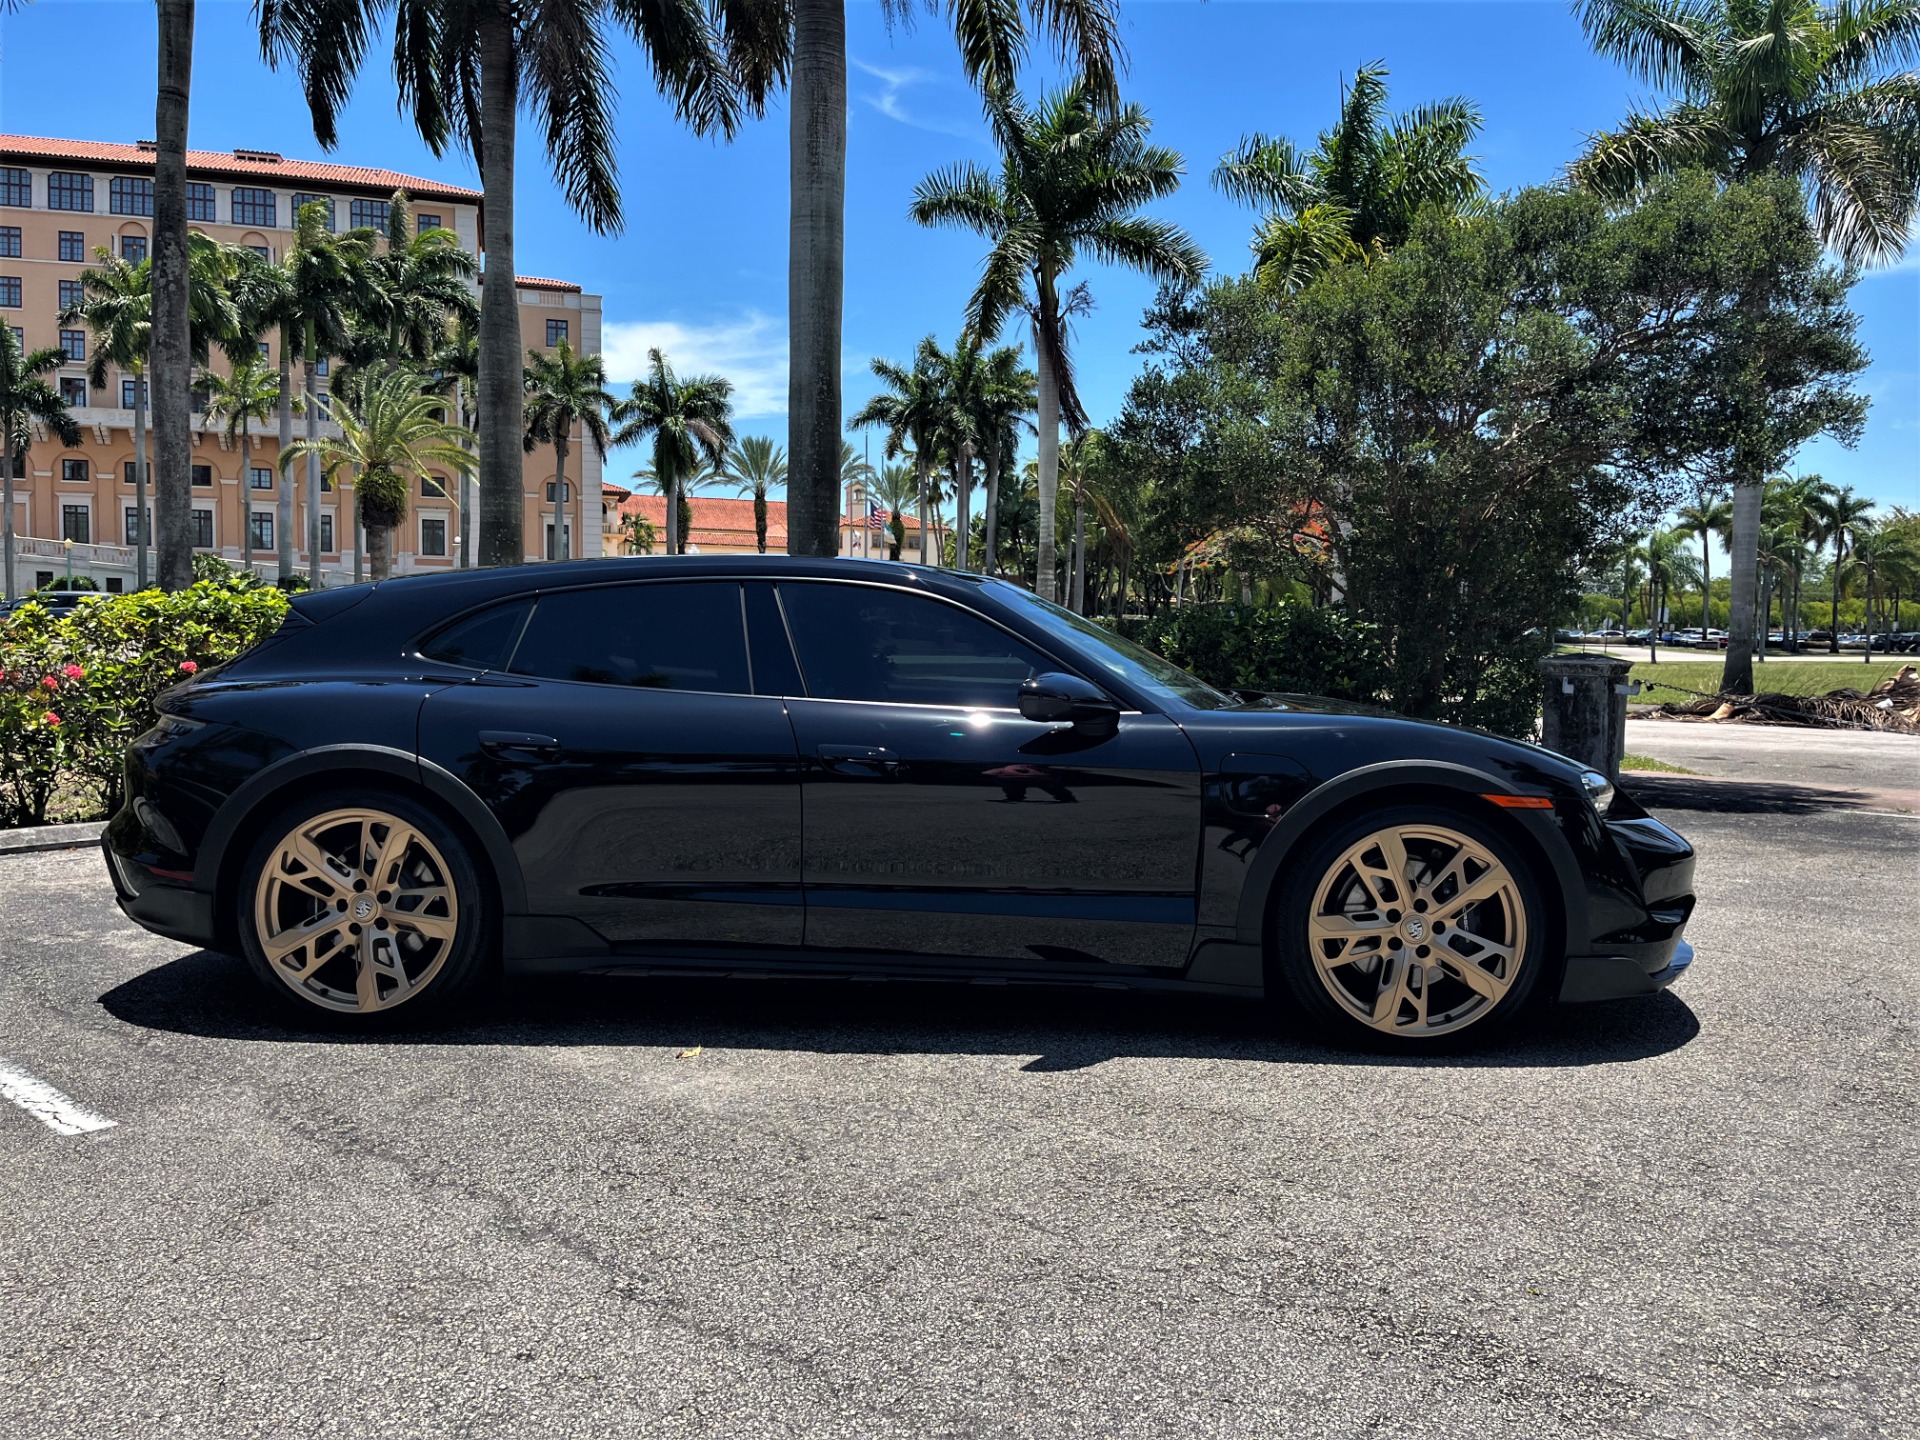 Used 2022 Porsche Taycan 4 Cross Turismo for sale $136,850 at The Gables Sports Cars in Miami FL 33146 3